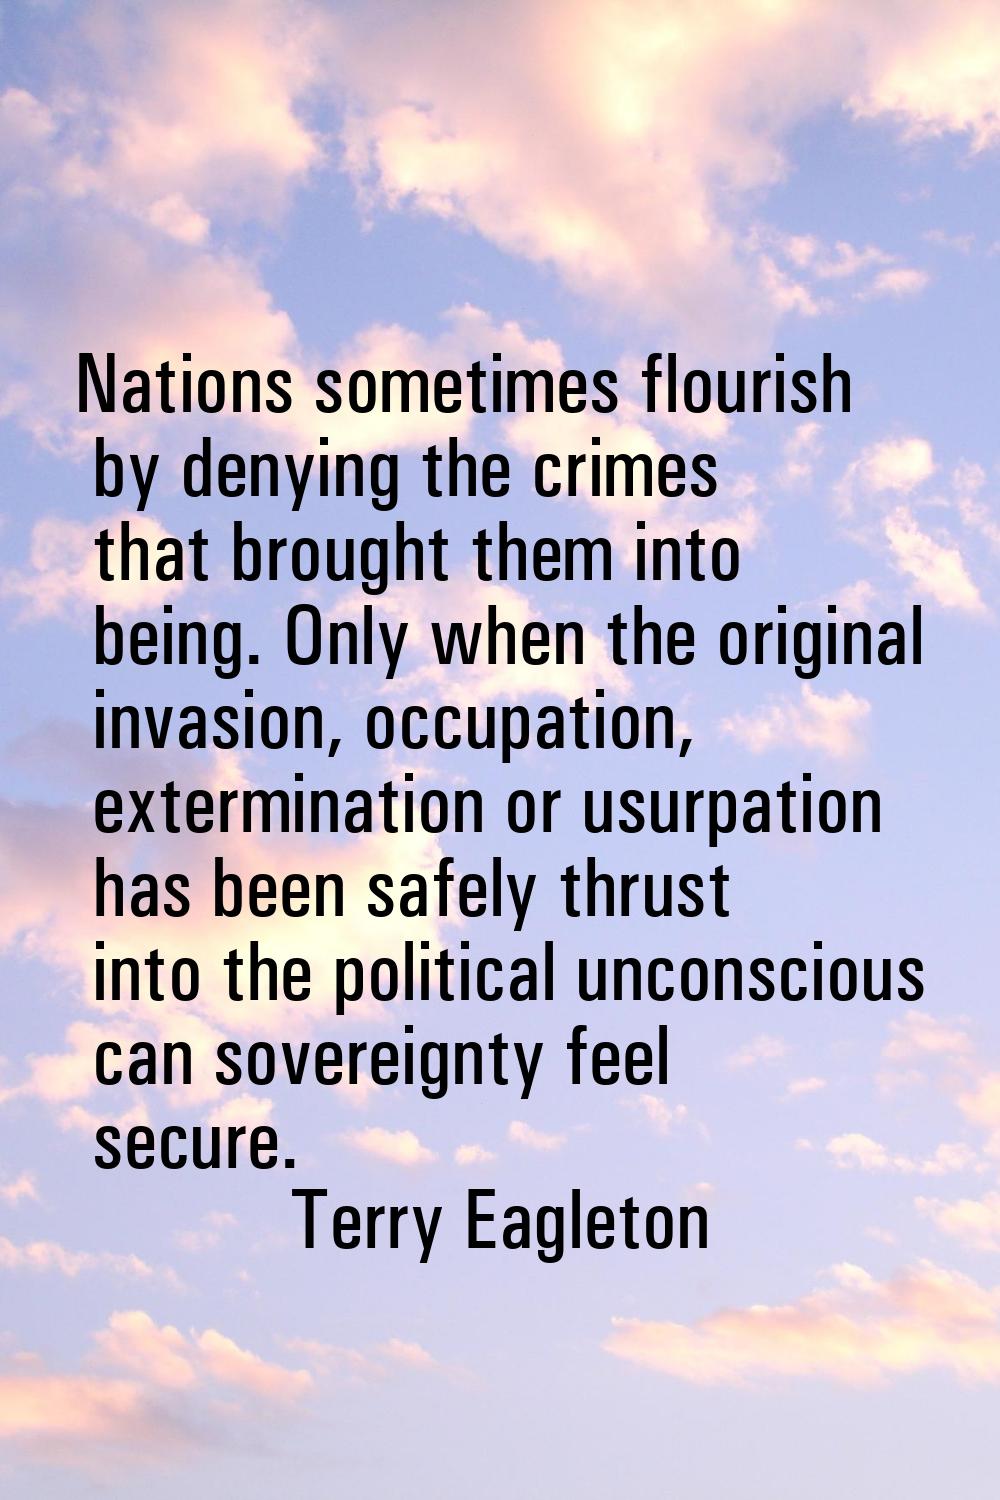 Nations sometimes flourish by denying the crimes that brought them into being. Only when the origin